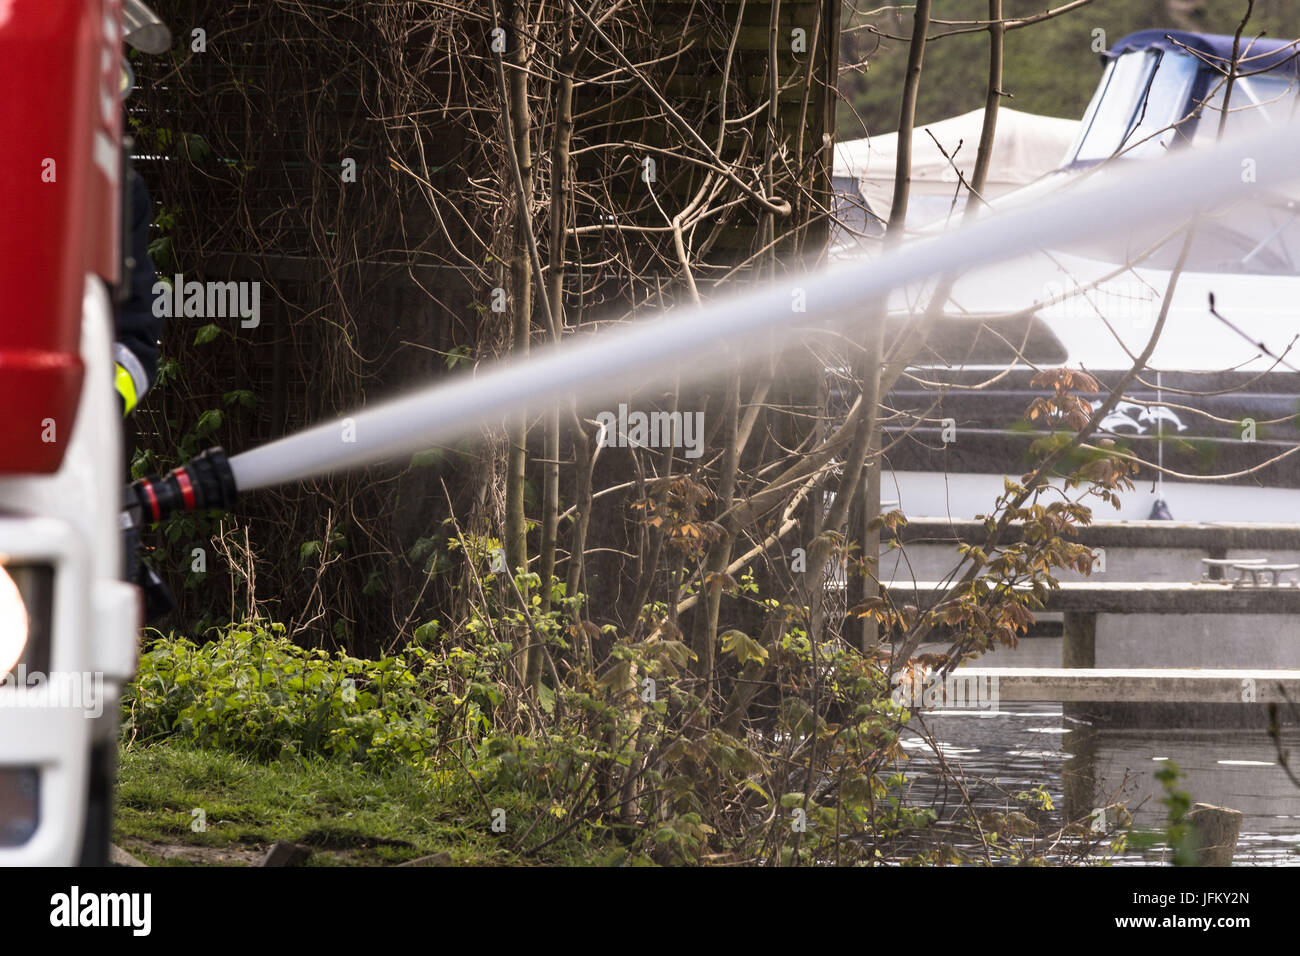 Fire department sprayed extinguishing water during an exercise. Stock Photo